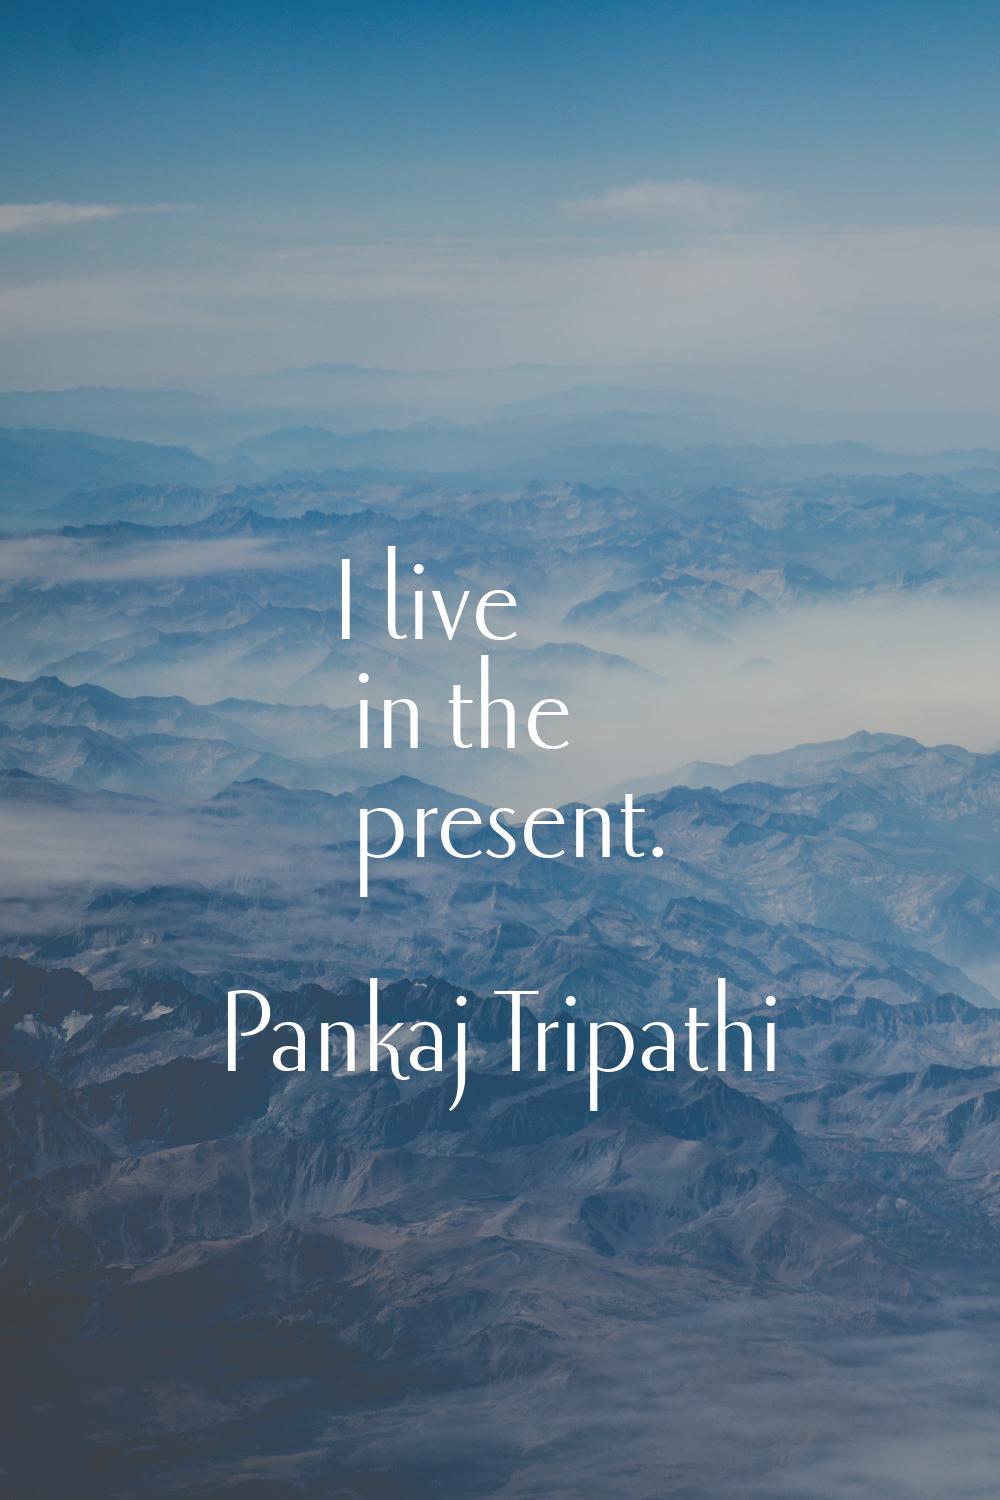 I live in the present.